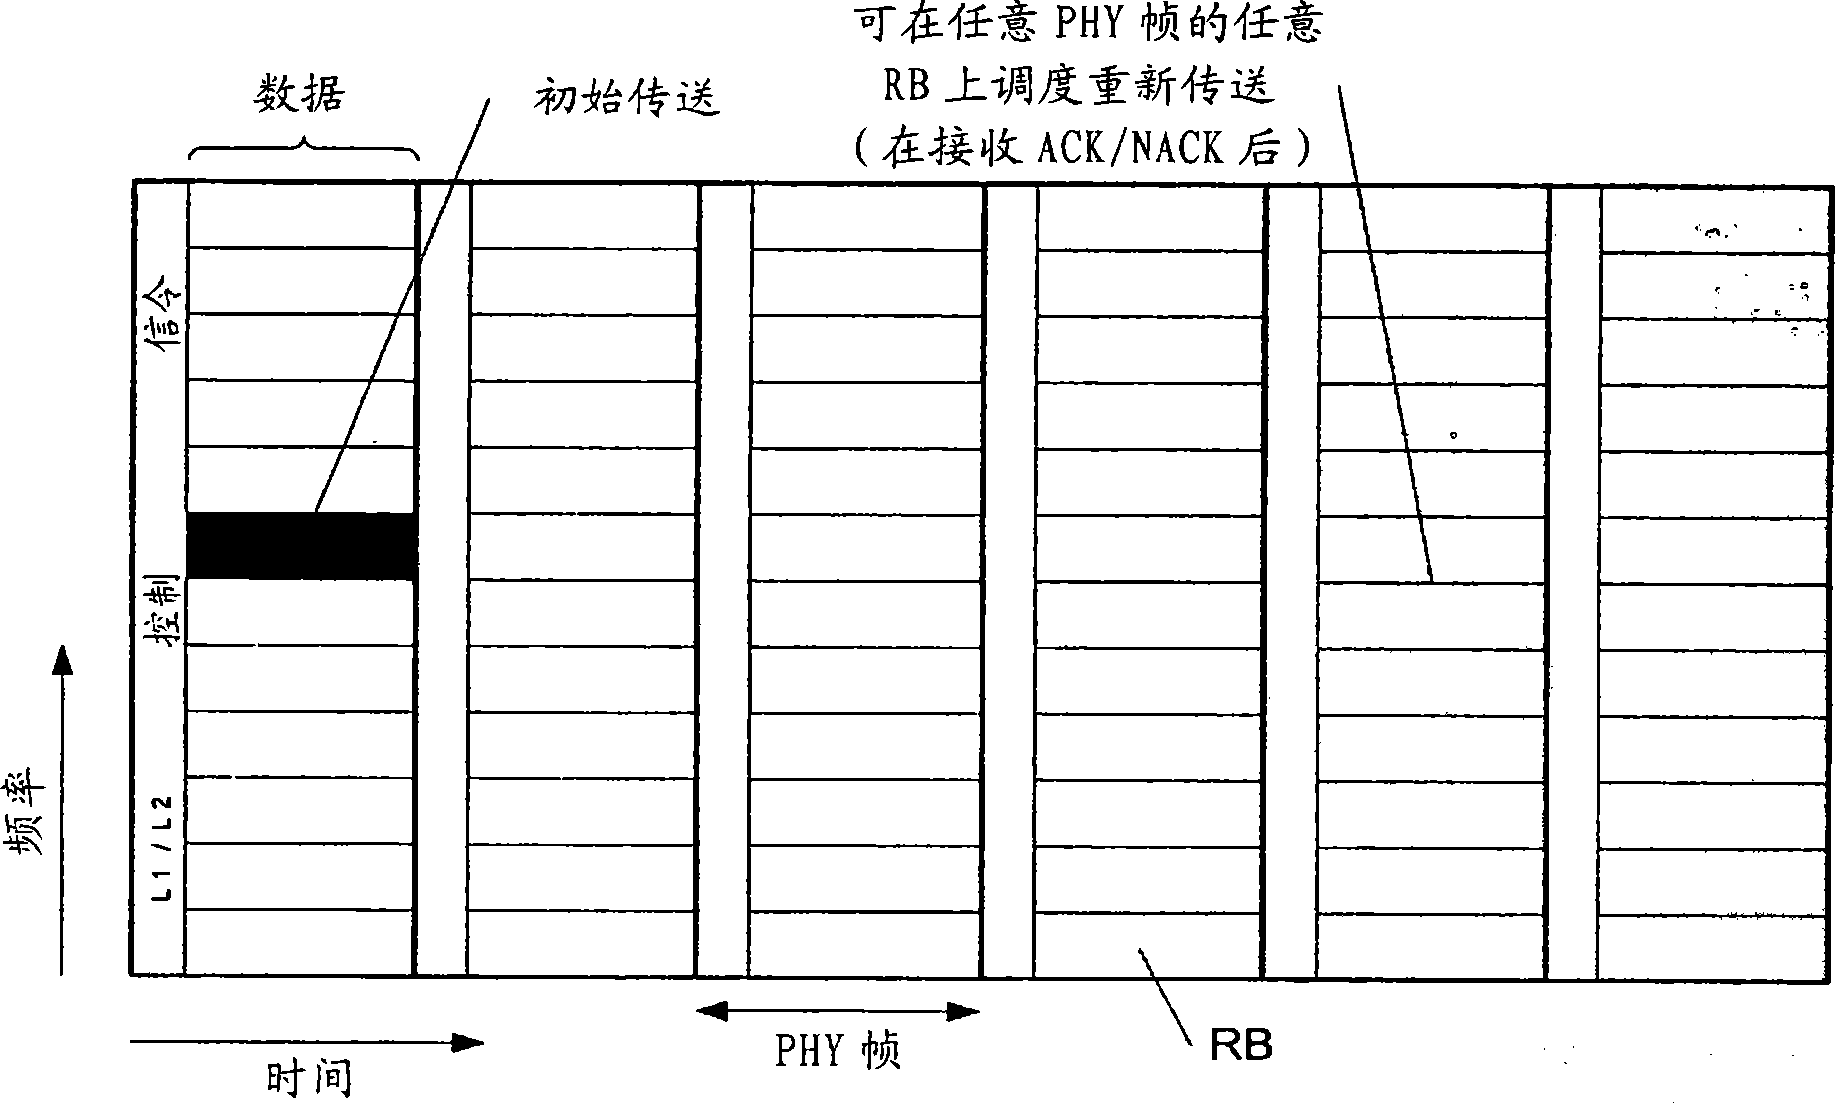 Resource block candidate selection technique employing packet scheduling in wireless communication systems